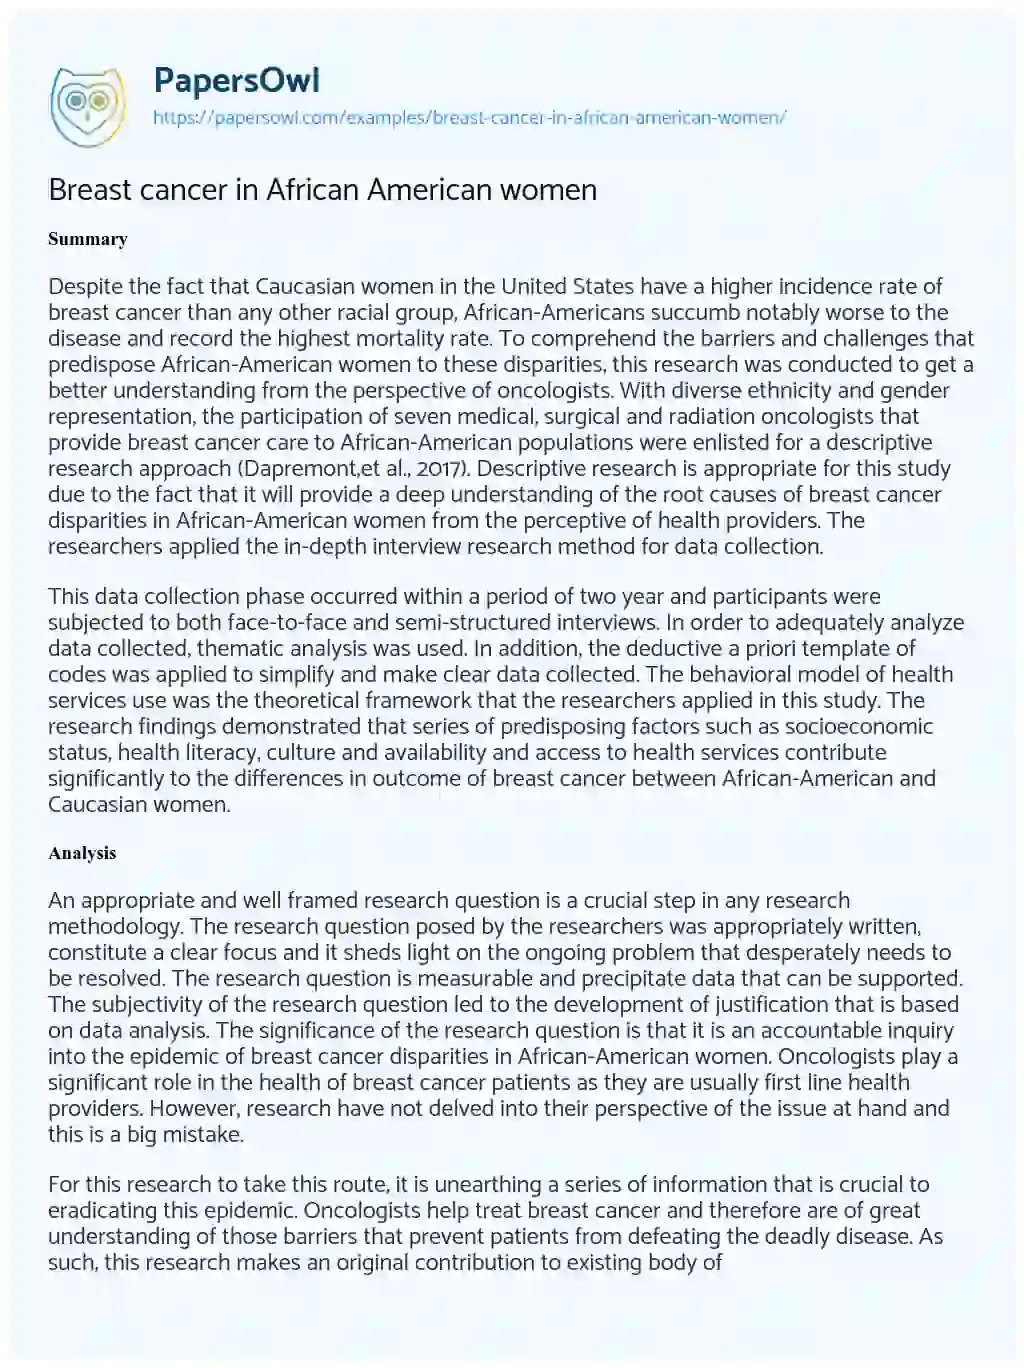 Essay on Breast Cancer in African American Women